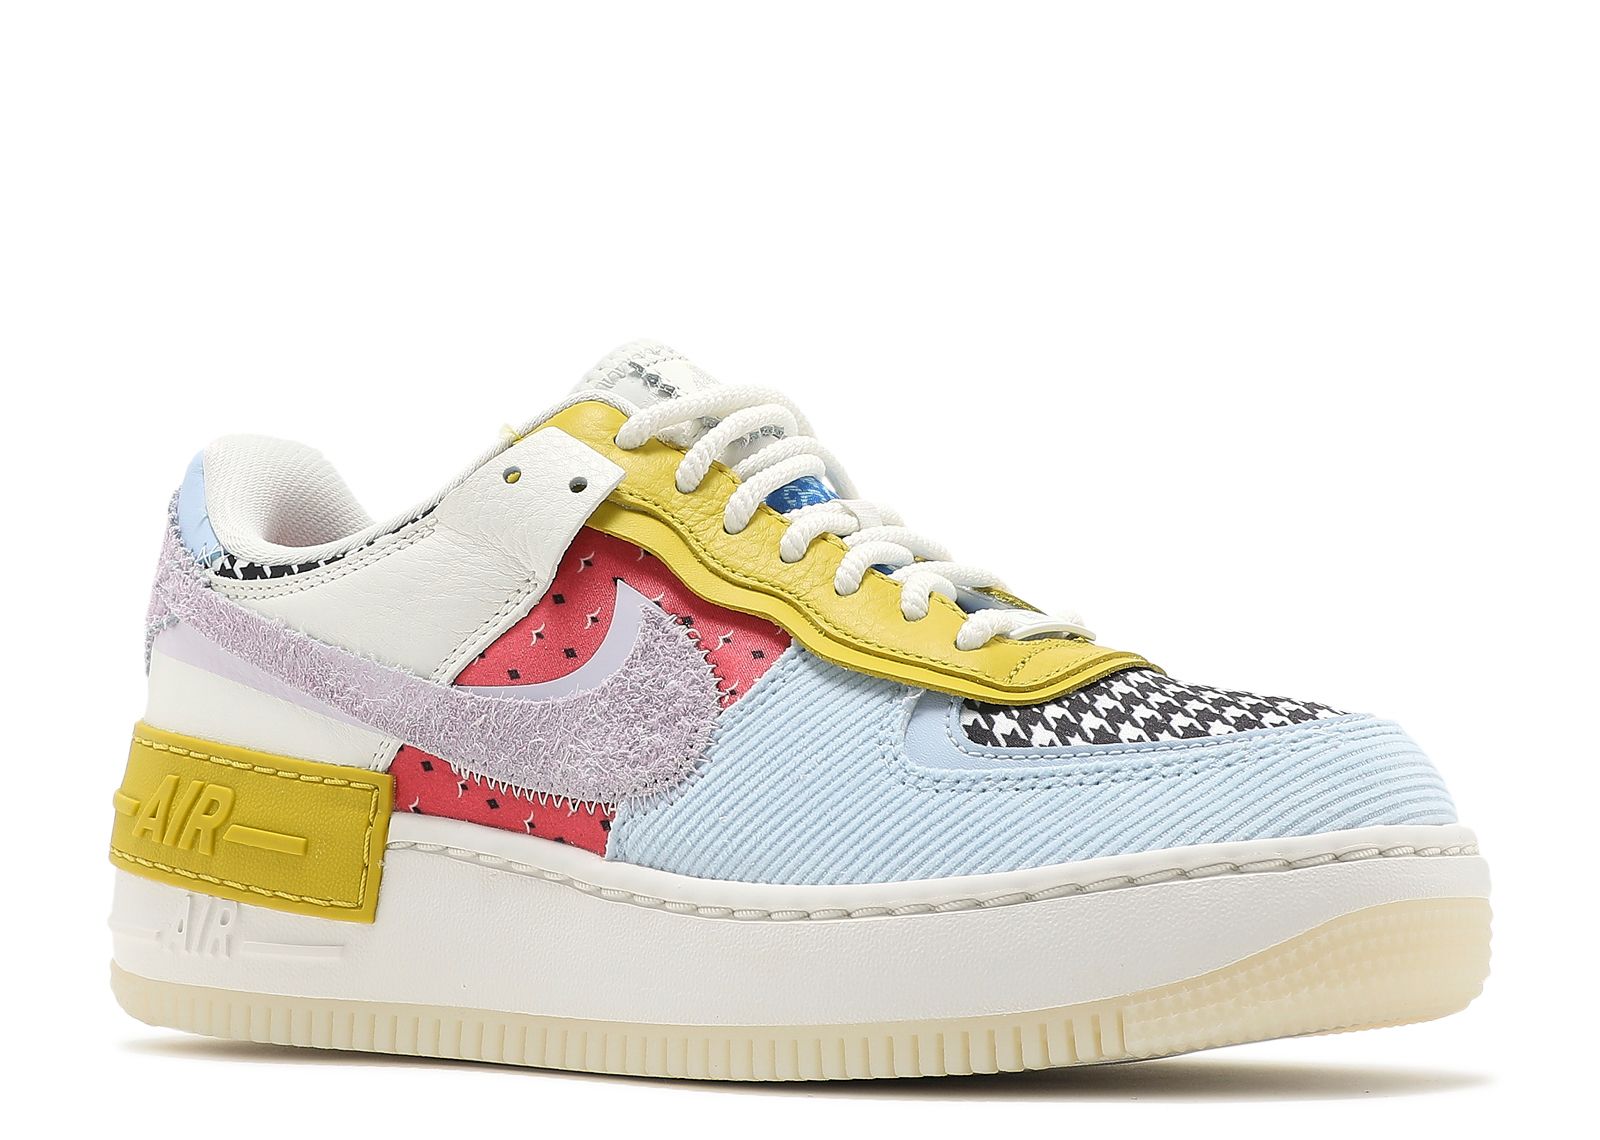 Buy Wmns Air Force 1 Shadow 'Patchwork' - DM8076 100